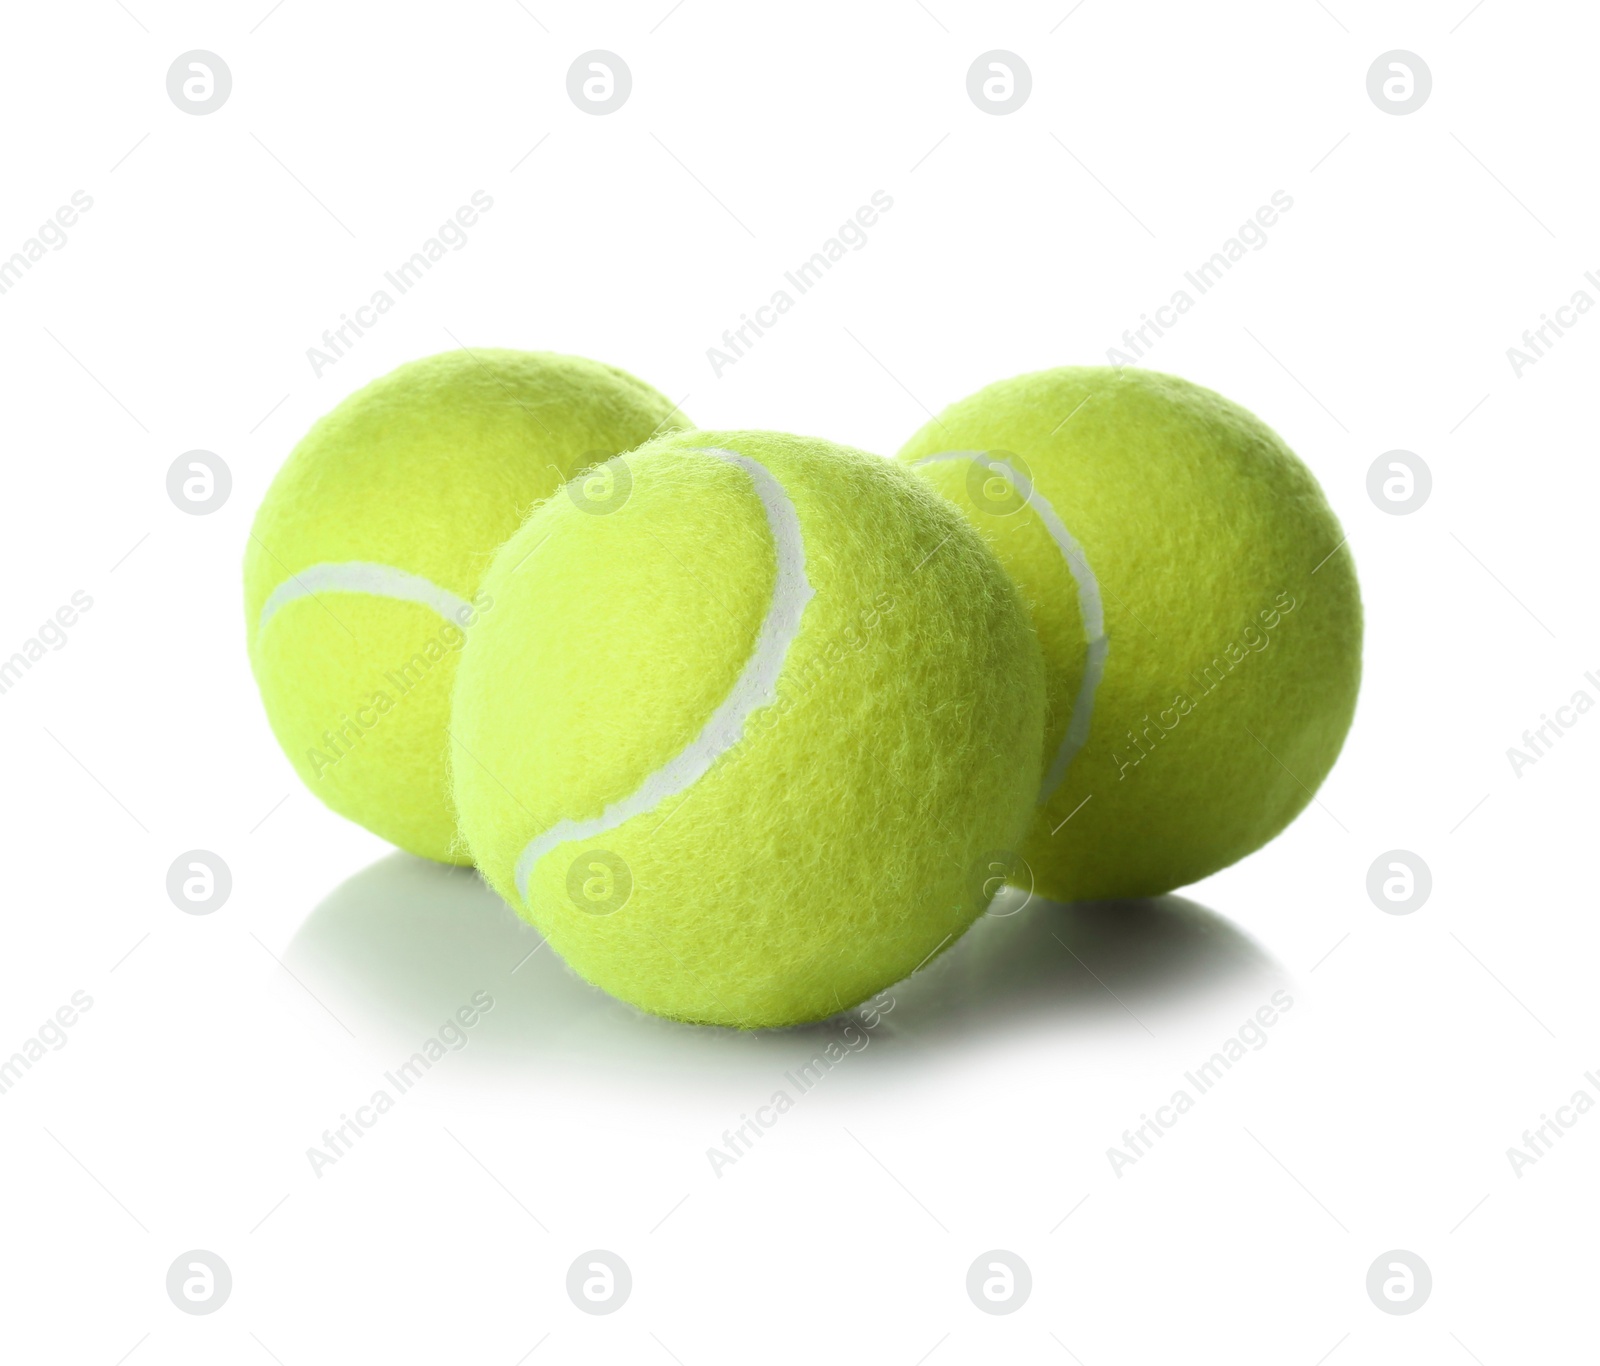 Photo of Tennis balls isolated on white. Sports equipment